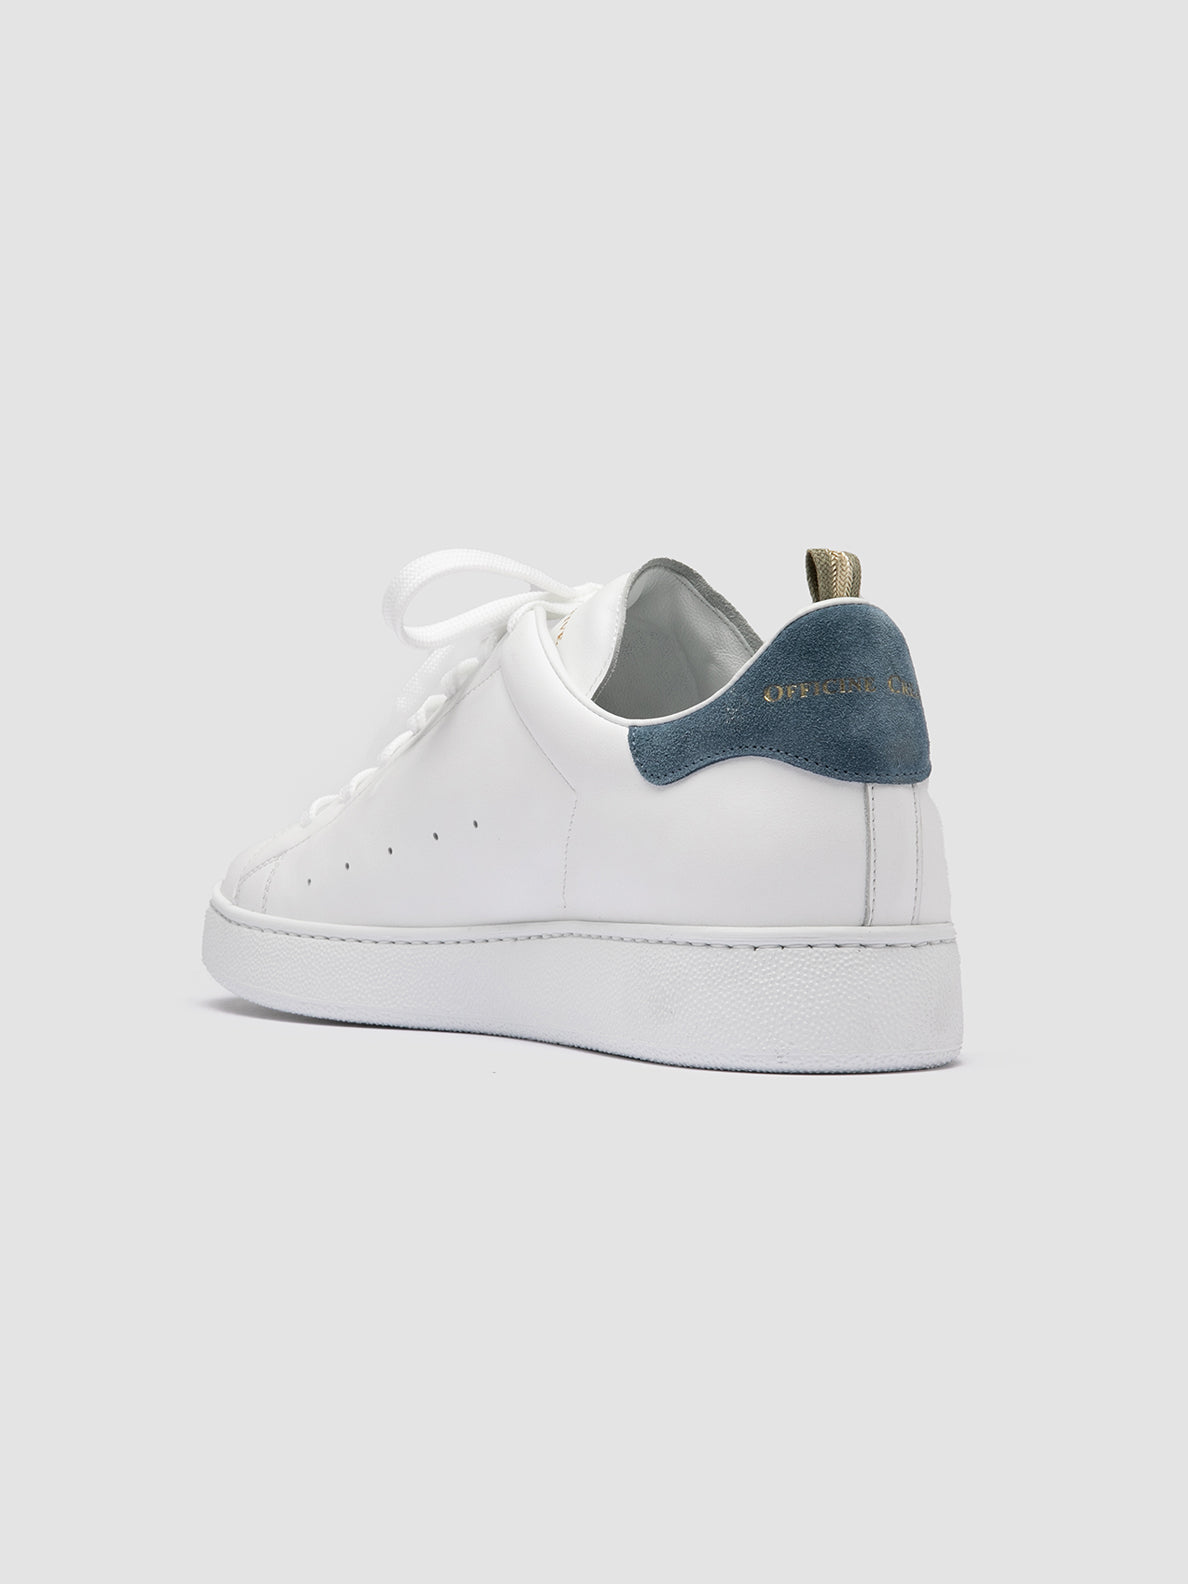 Men's White Leather and Suede Low Top Sneakers: MOWER 002